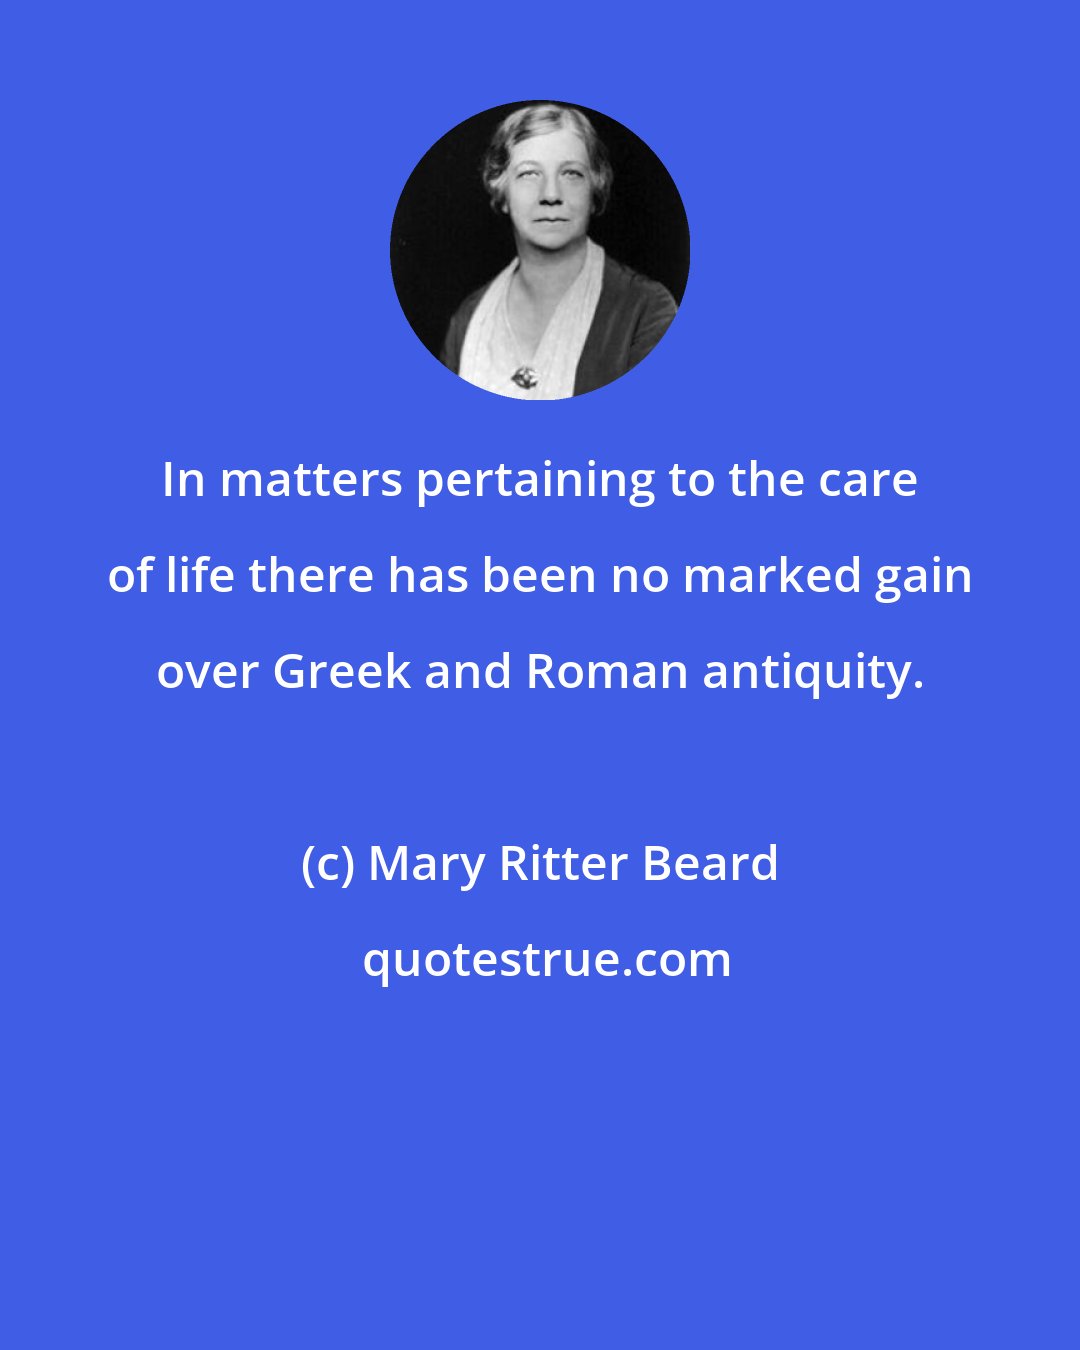 Mary Ritter Beard: In matters pertaining to the care of life there has been no marked gain over Greek and Roman antiquity.